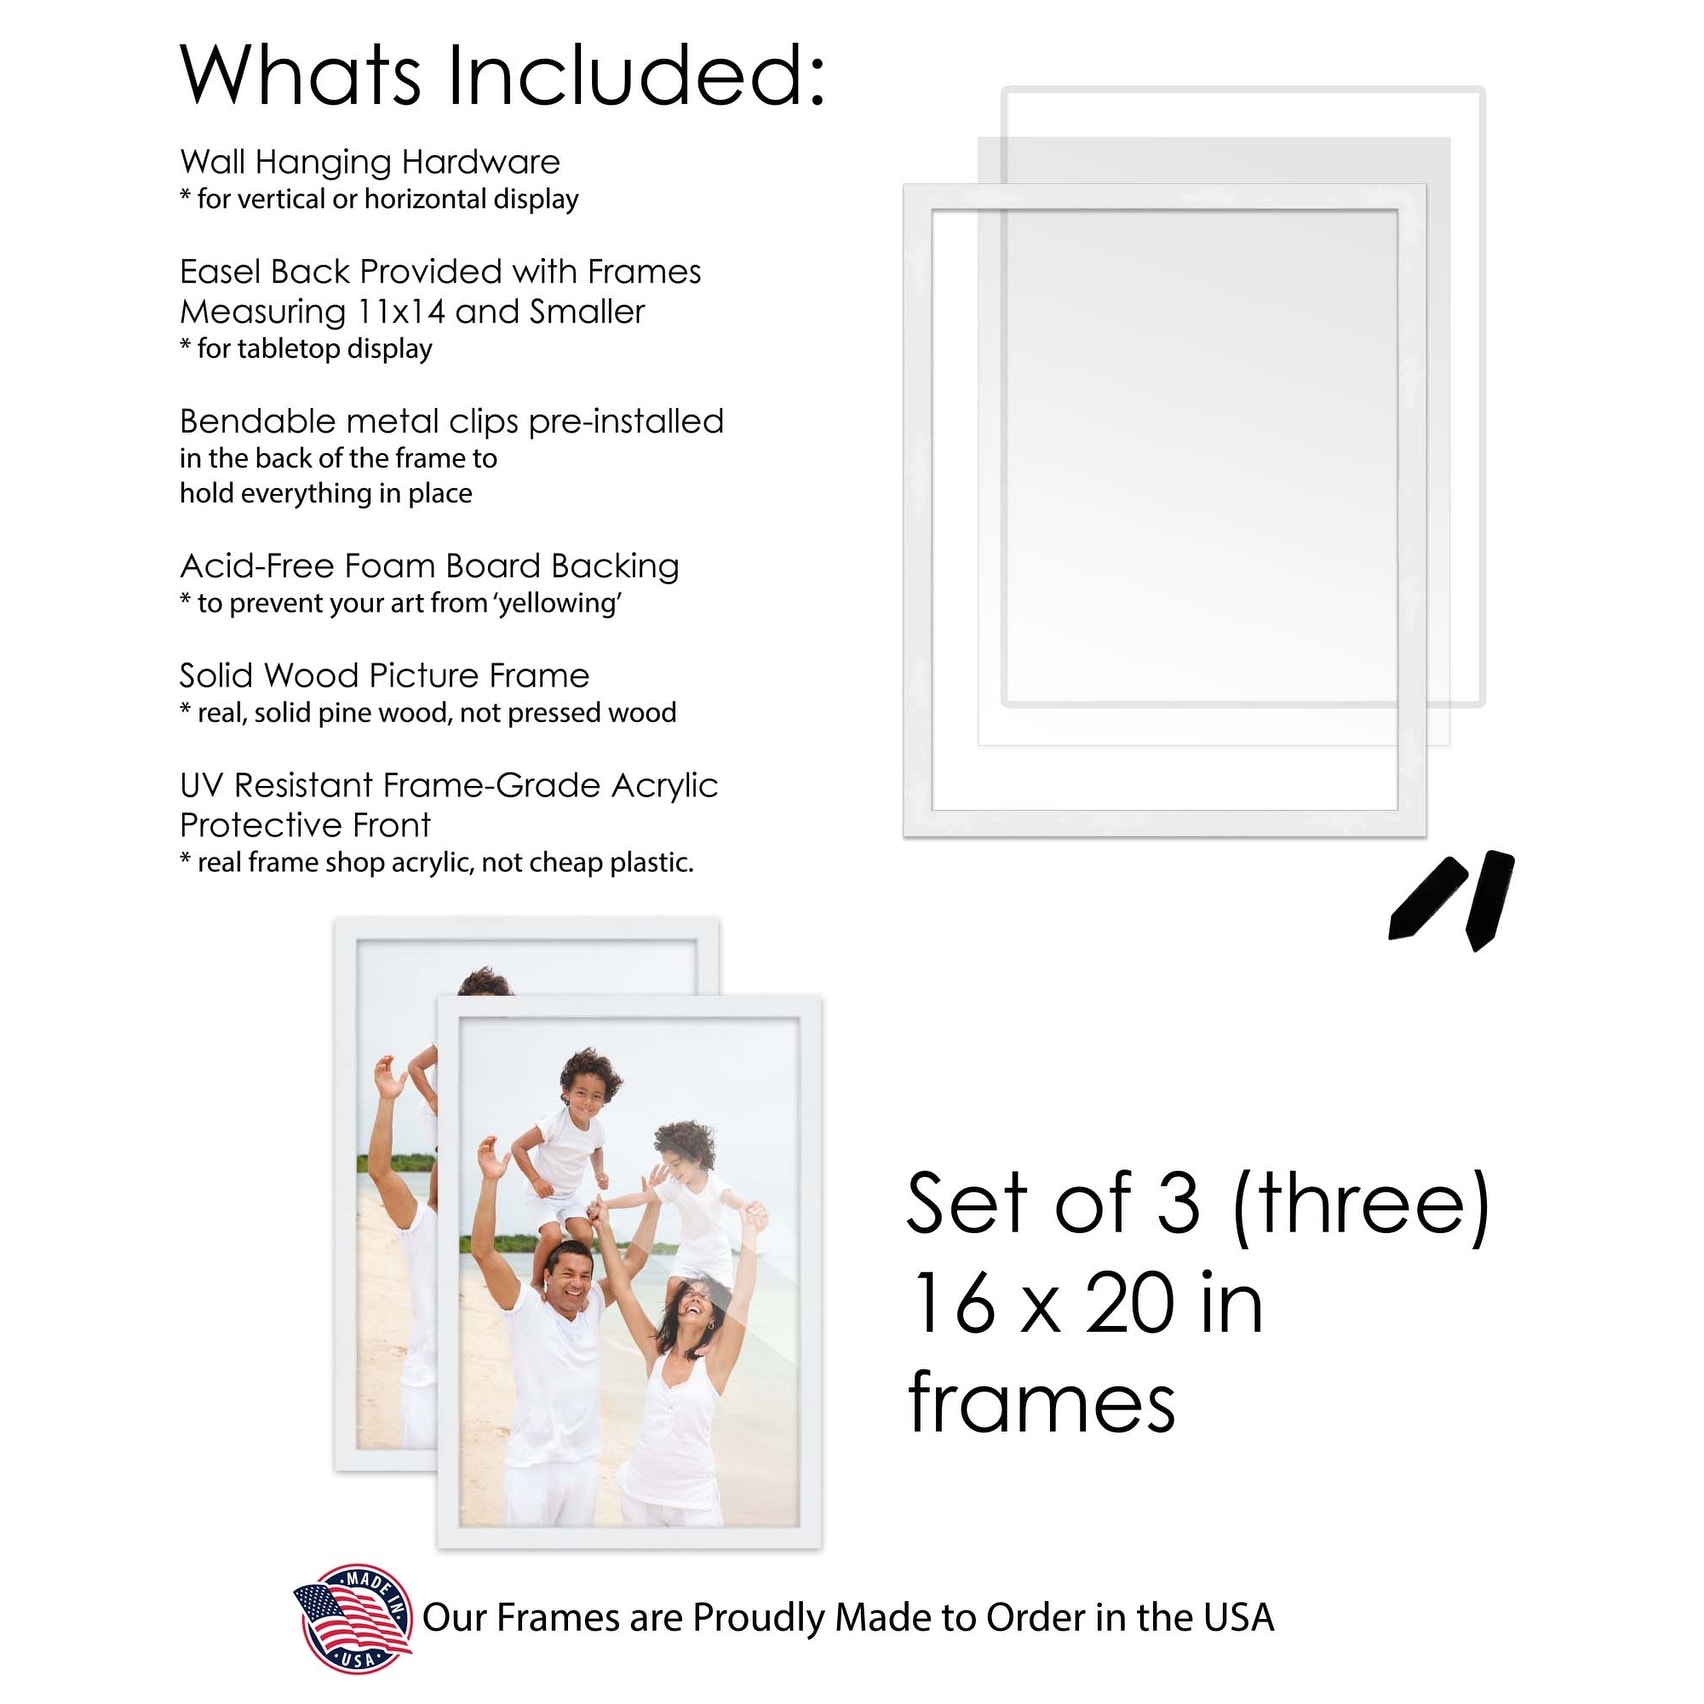 Architect 16x20 Picture Frame - Bed Bath & Beyond - 9473859